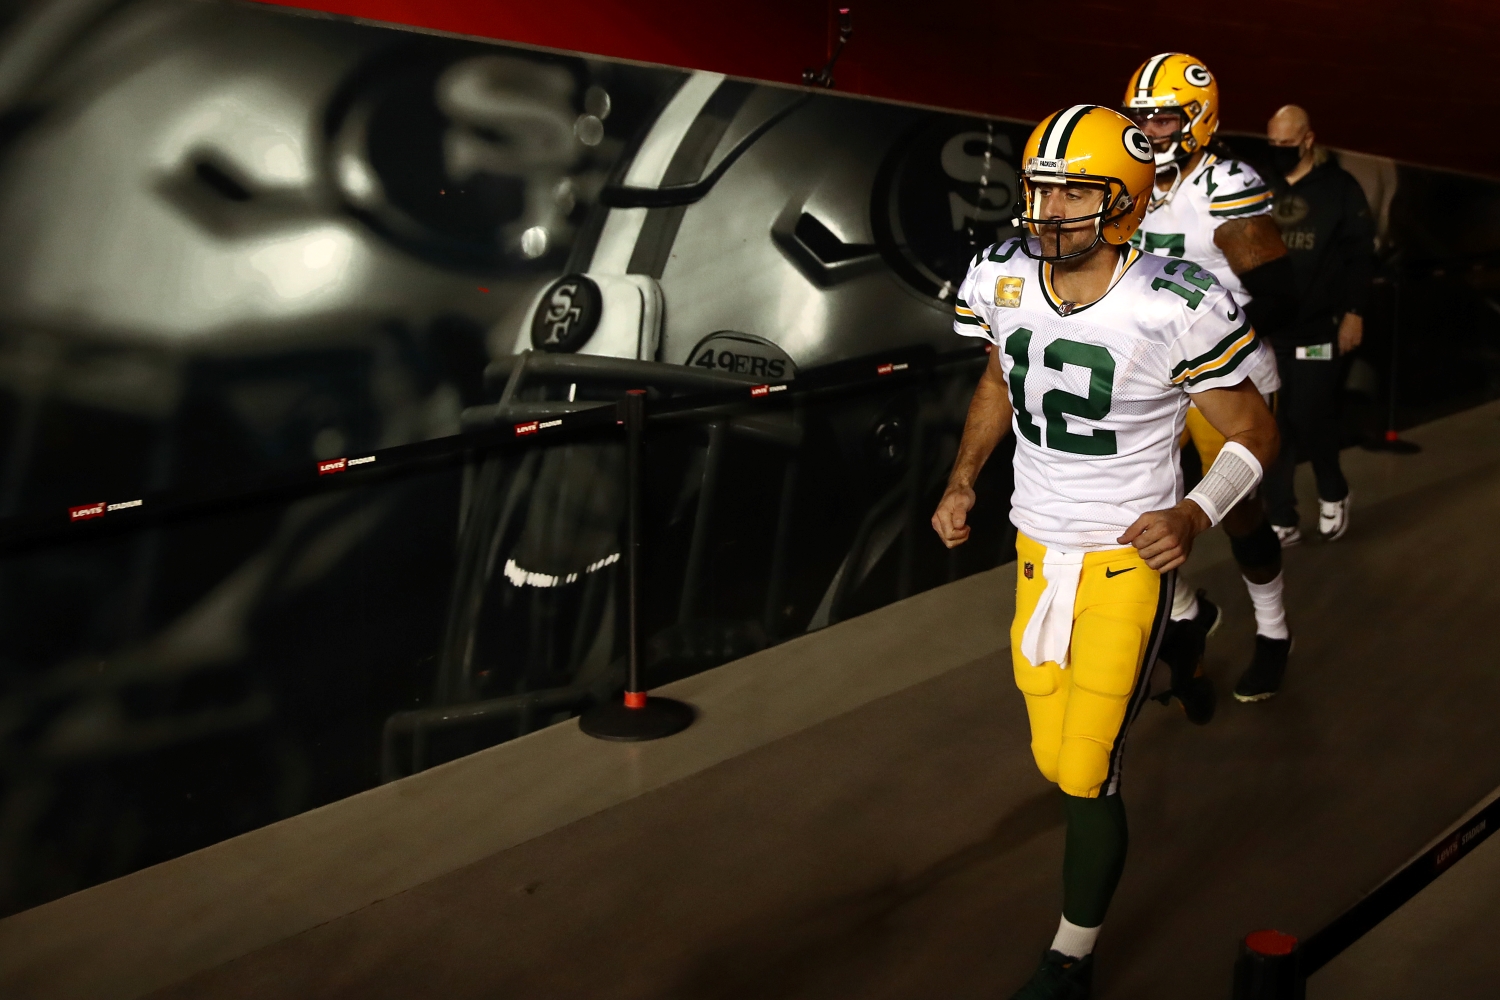 Green Bay Packers quarterback Aaron Rodgers exits the tunnel with a teammate